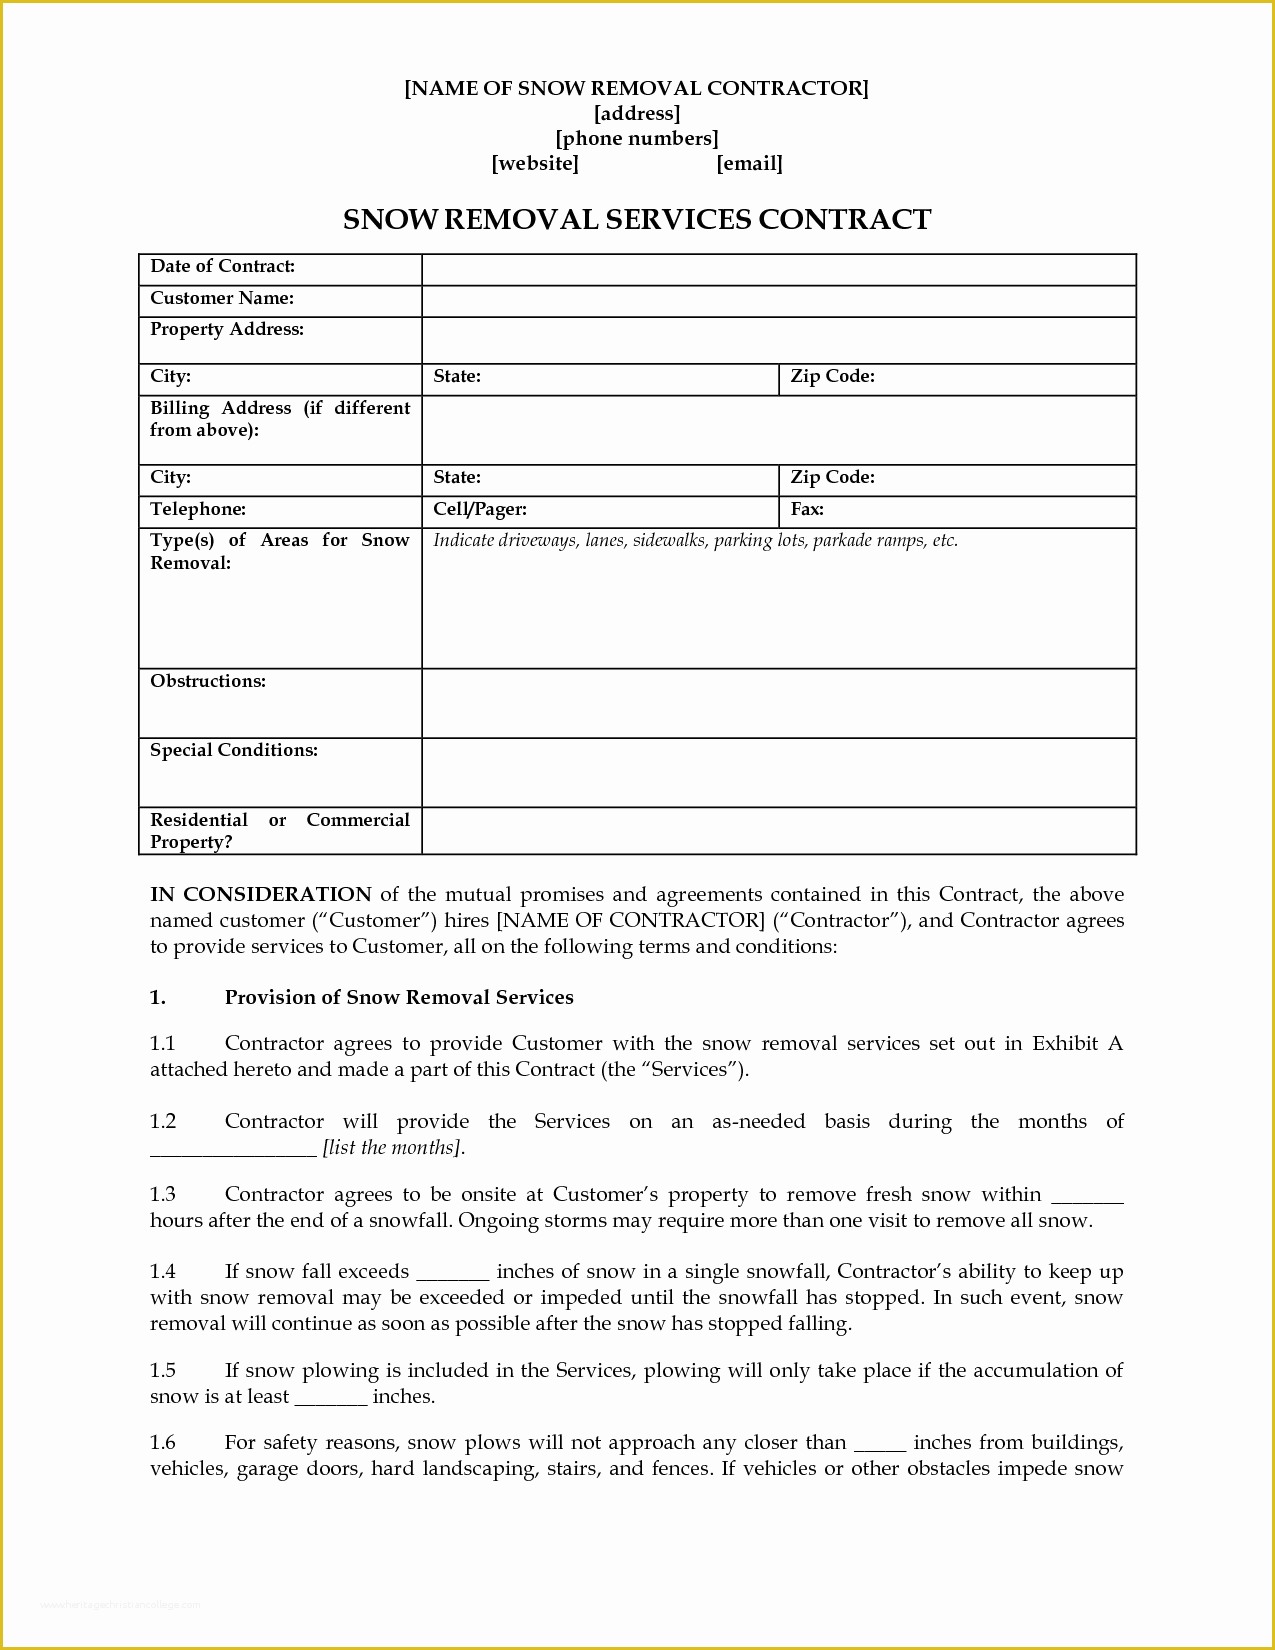 Free Fence Contract Template Of 10 Best Of Snow Plow Proposal forms Snow Removal